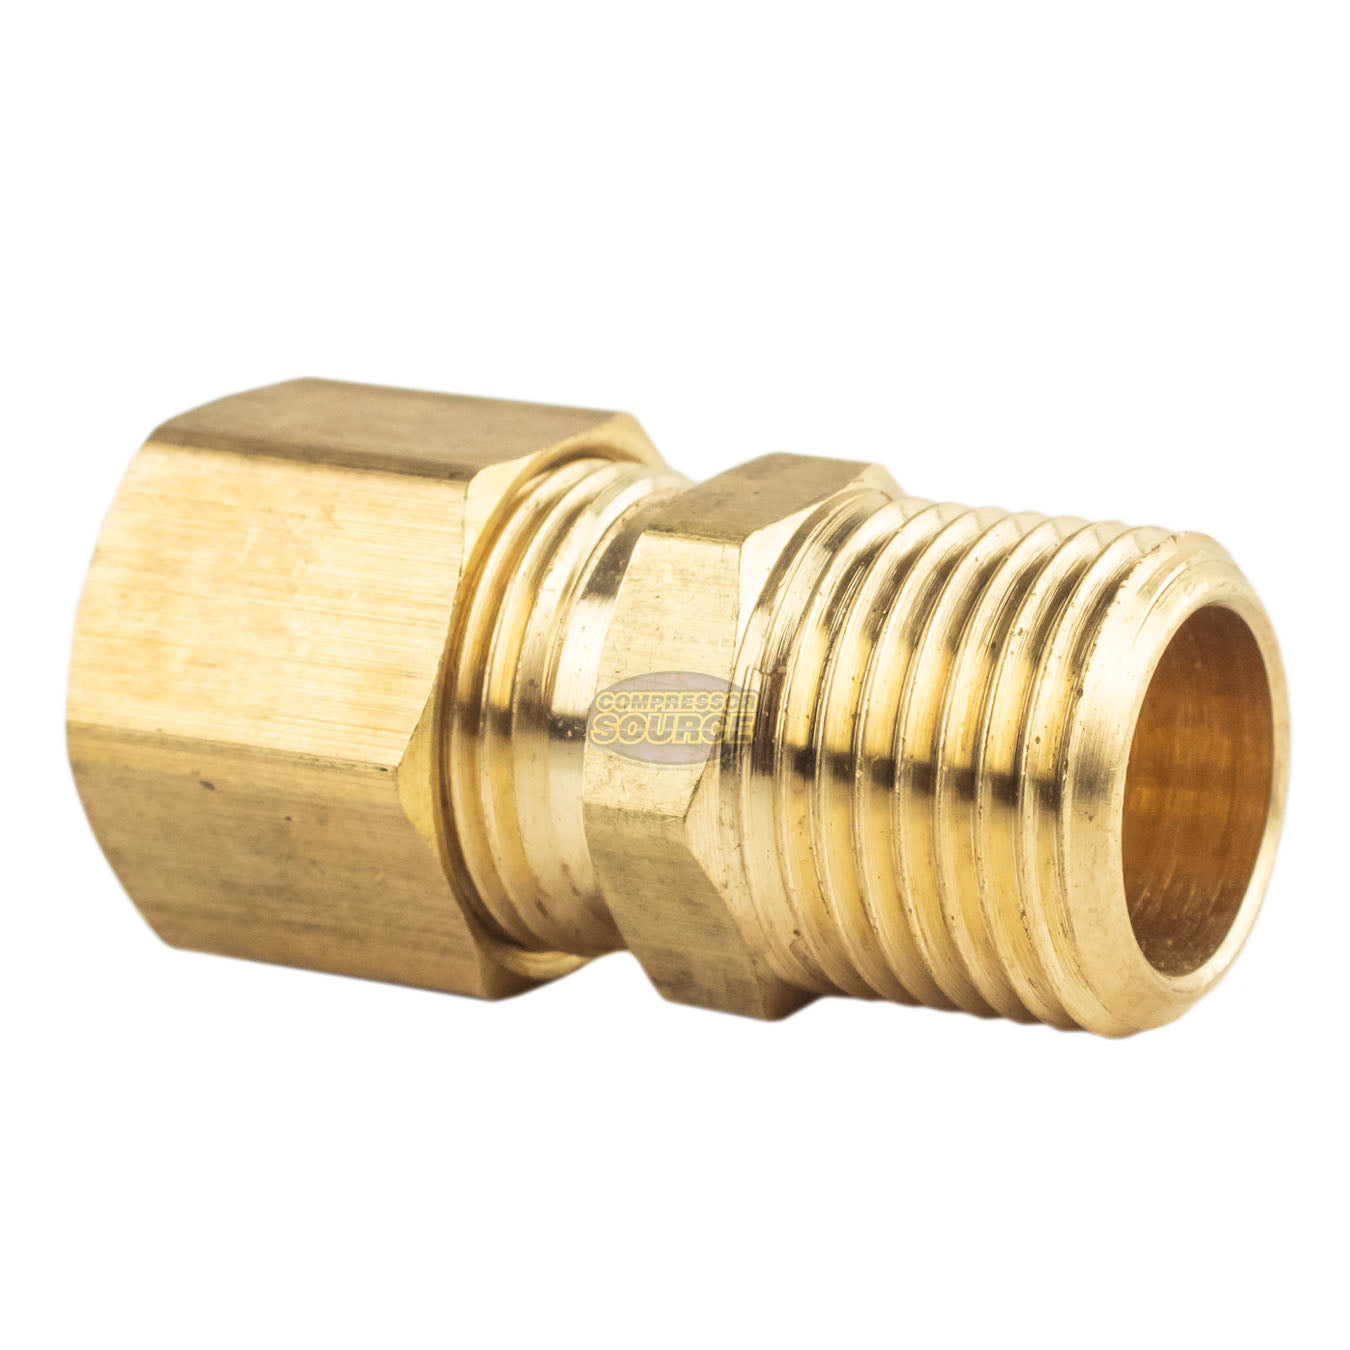 5 Pack 1/2" x 3/8" Male NPT Connector Brass Compression Fitting for 1/2" OD Tube